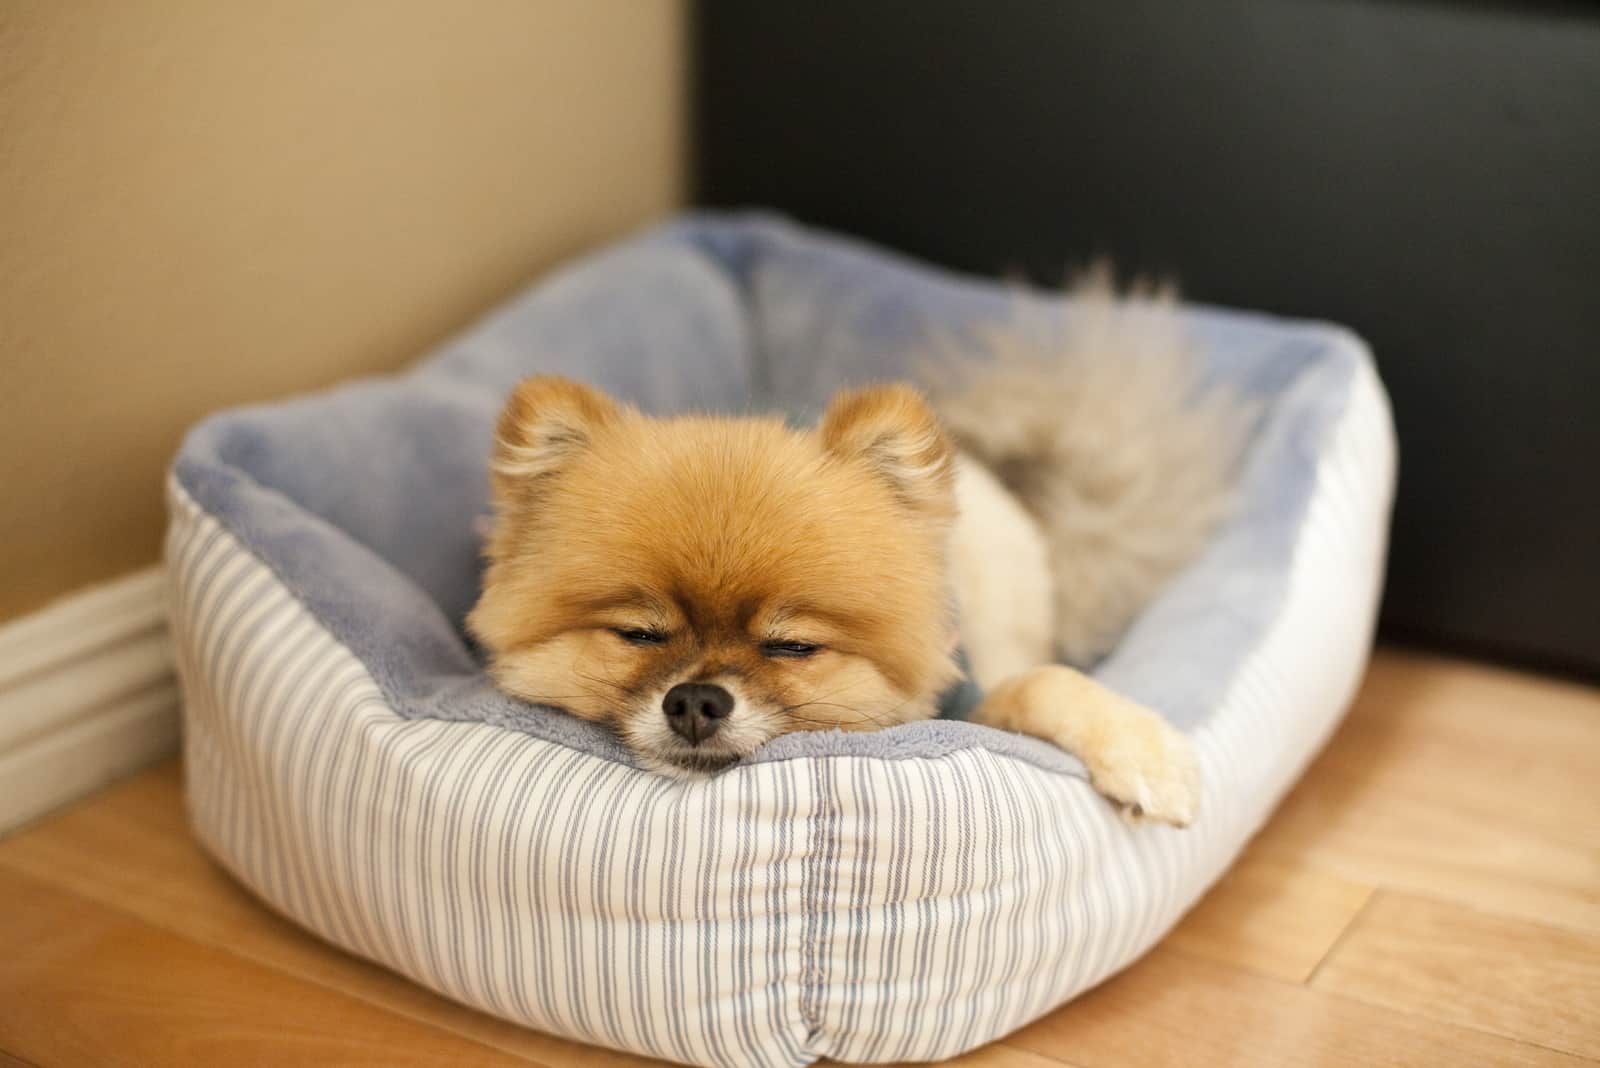 the Pomeranian sleeps in his bed